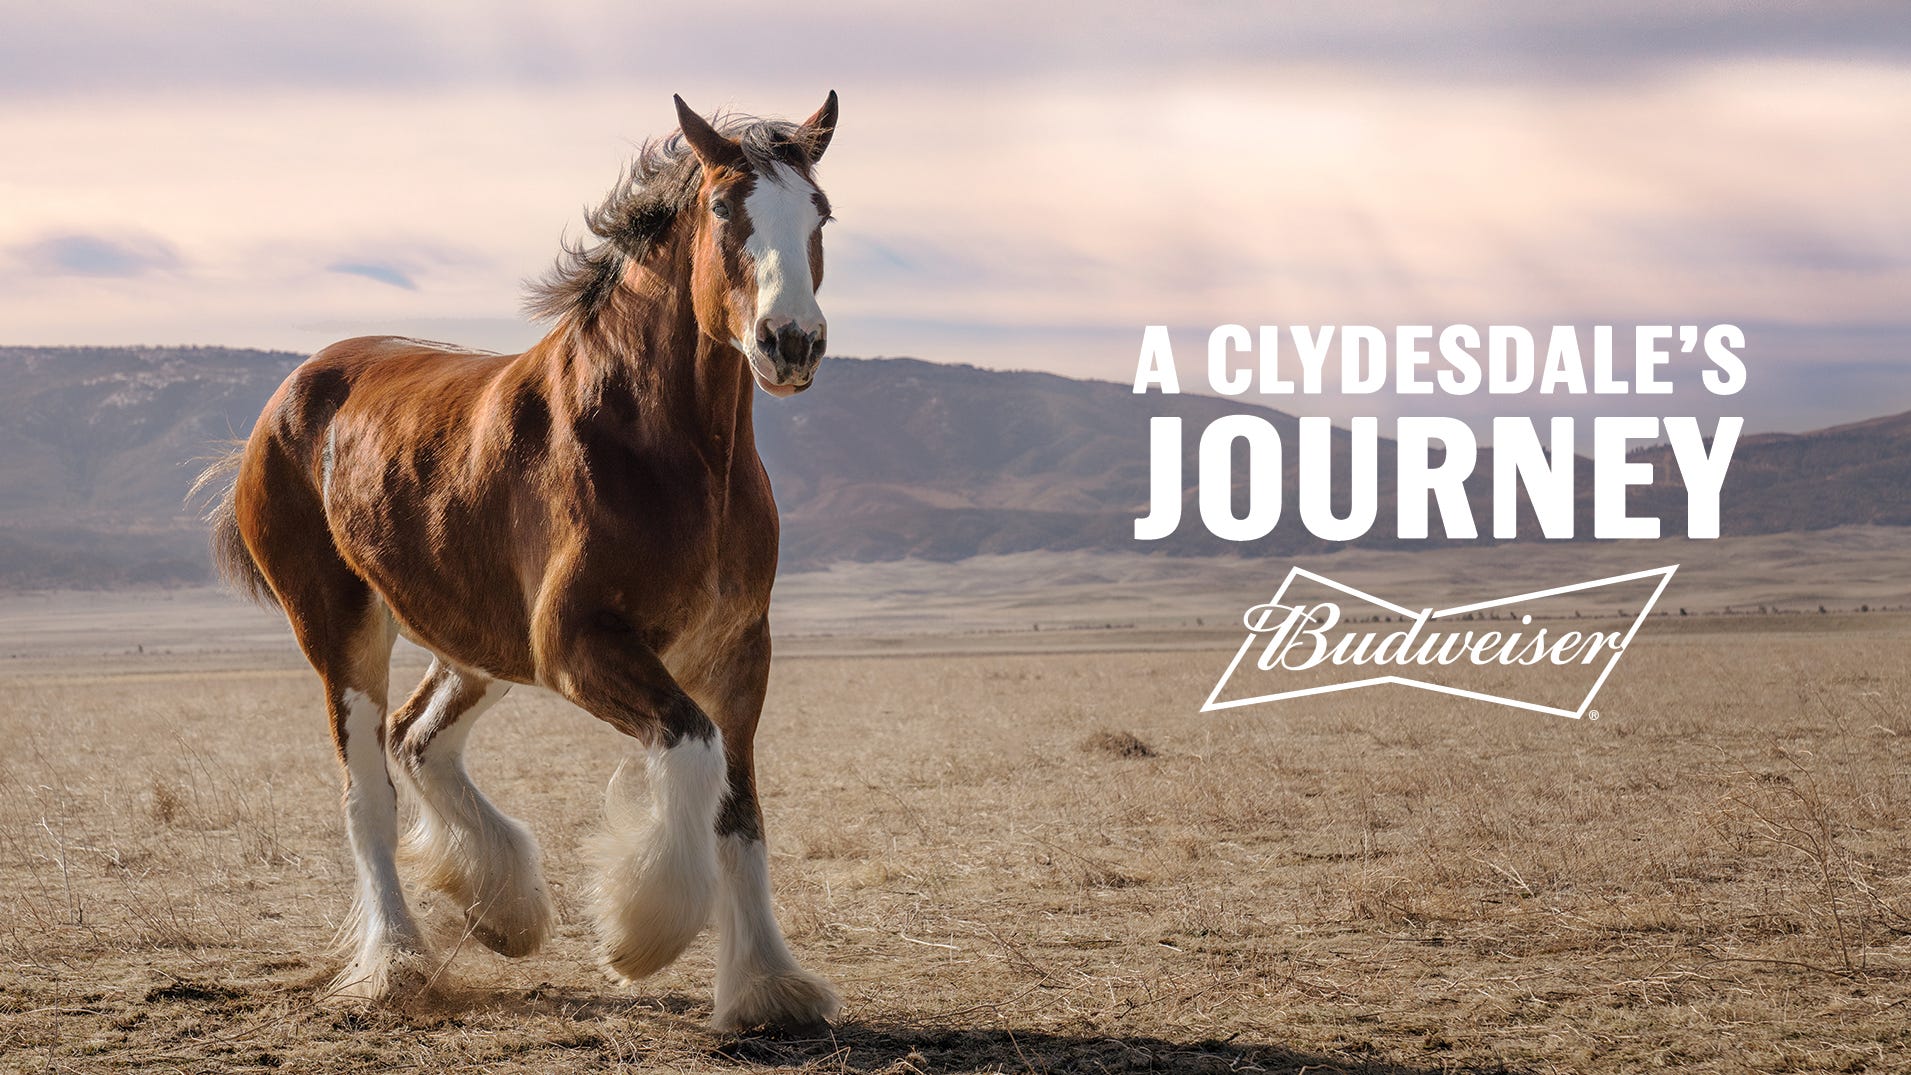 Budweiser reveals 2022 Super Bowl ad with Clydesdale, dog reunion